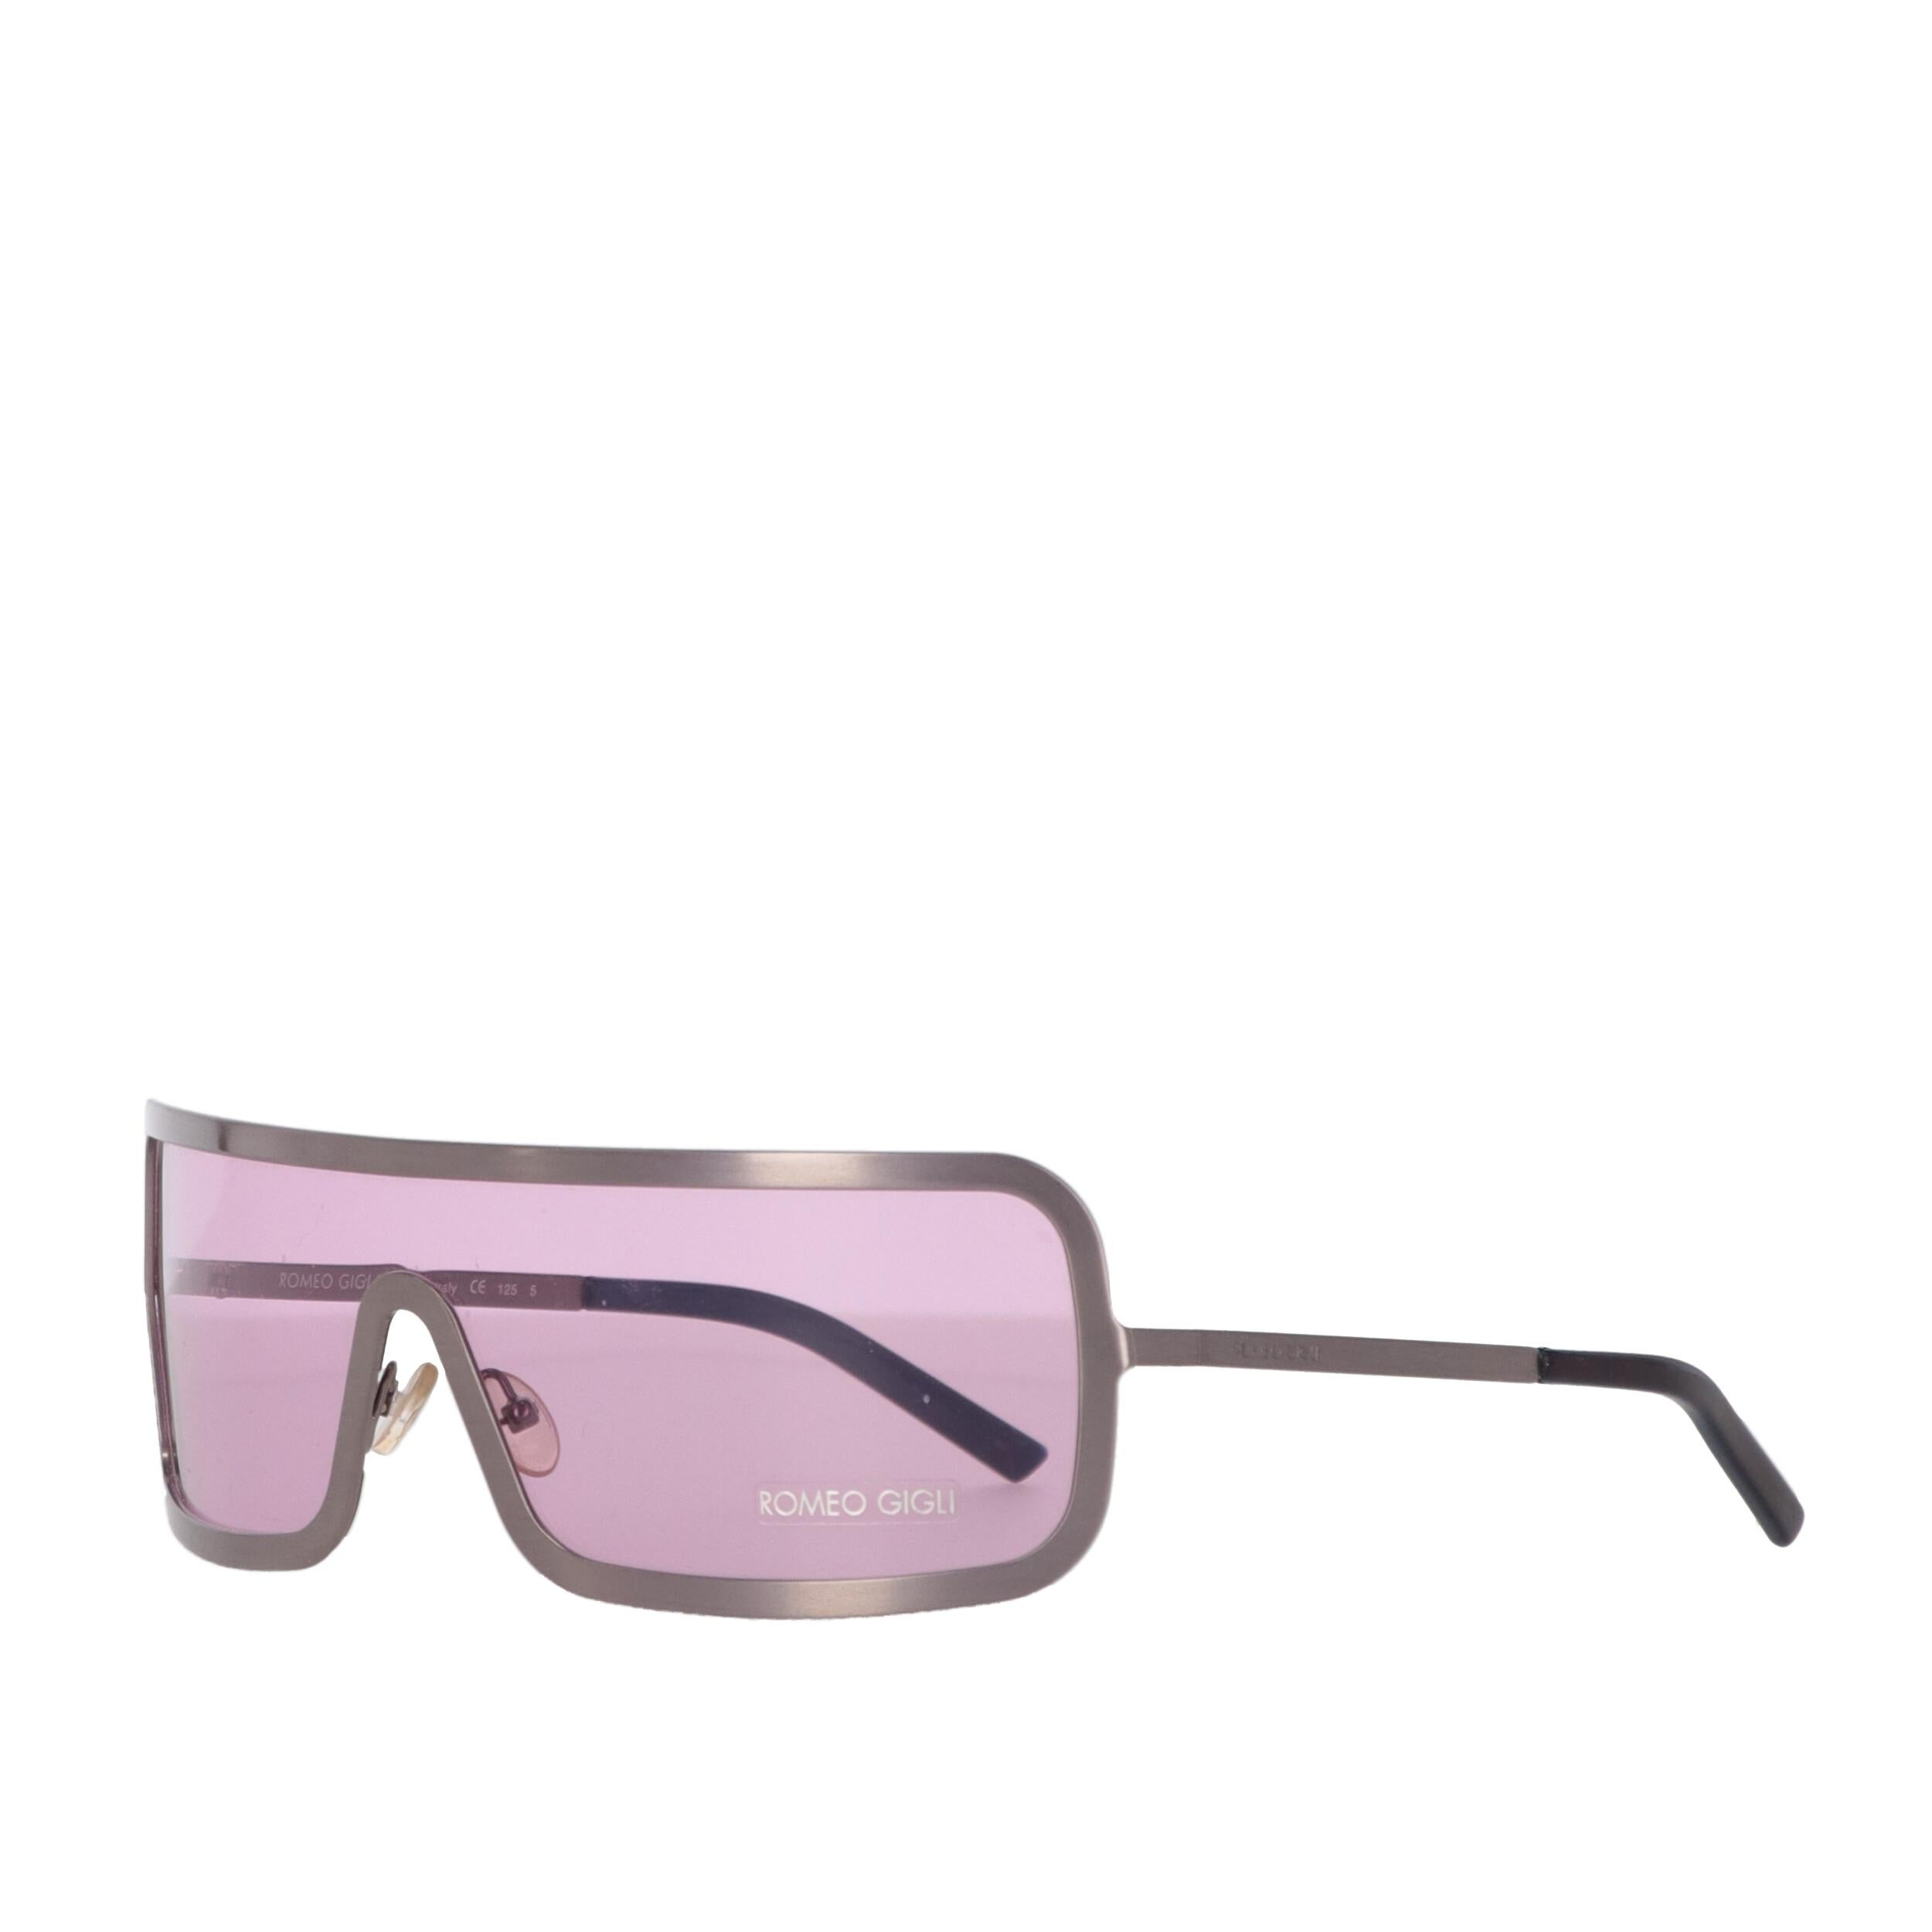 Romeo Gigli pink mask sunglasses with slightly curved lenses and flat pink-tone metal temples.
Please note, this item cannot be shipped to the US.

Years: 90s
Made in Italy

Width: 15,5 cm
Height: 4,7 cm